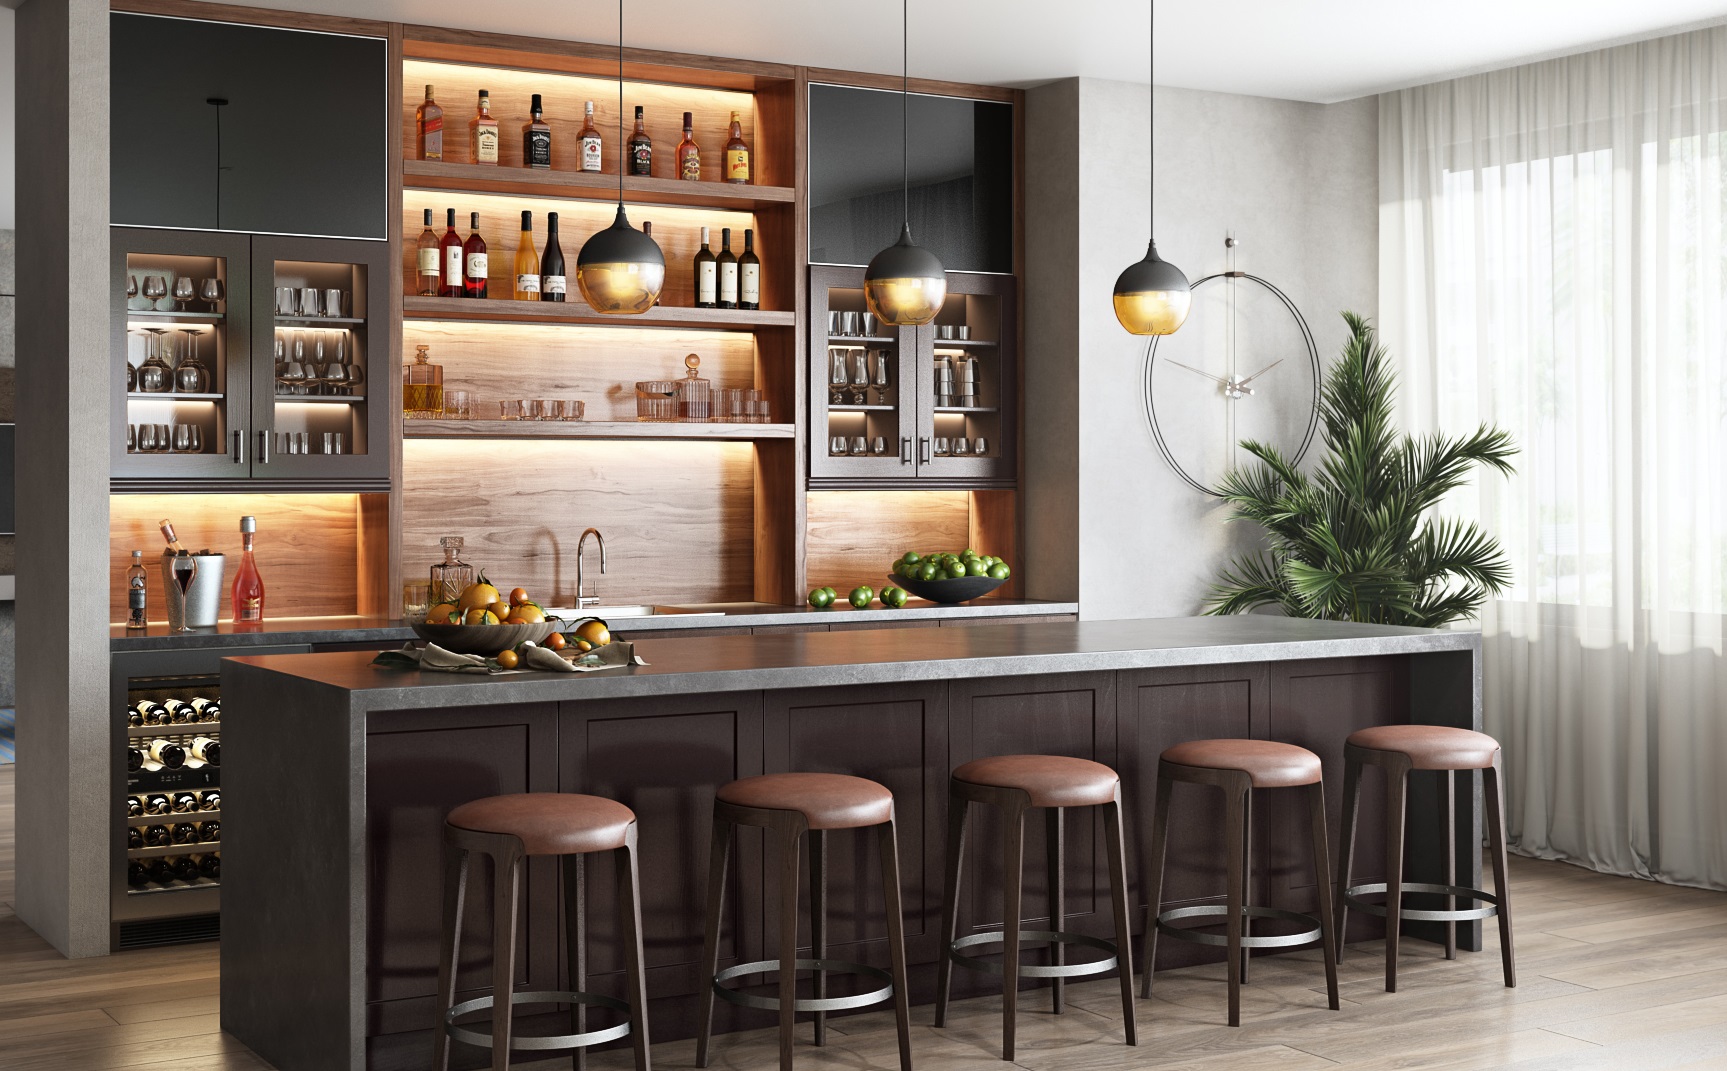 Todays Designer Kitchens Espresso-bar-1 Creating a Bar Area in Your Home That You Love 